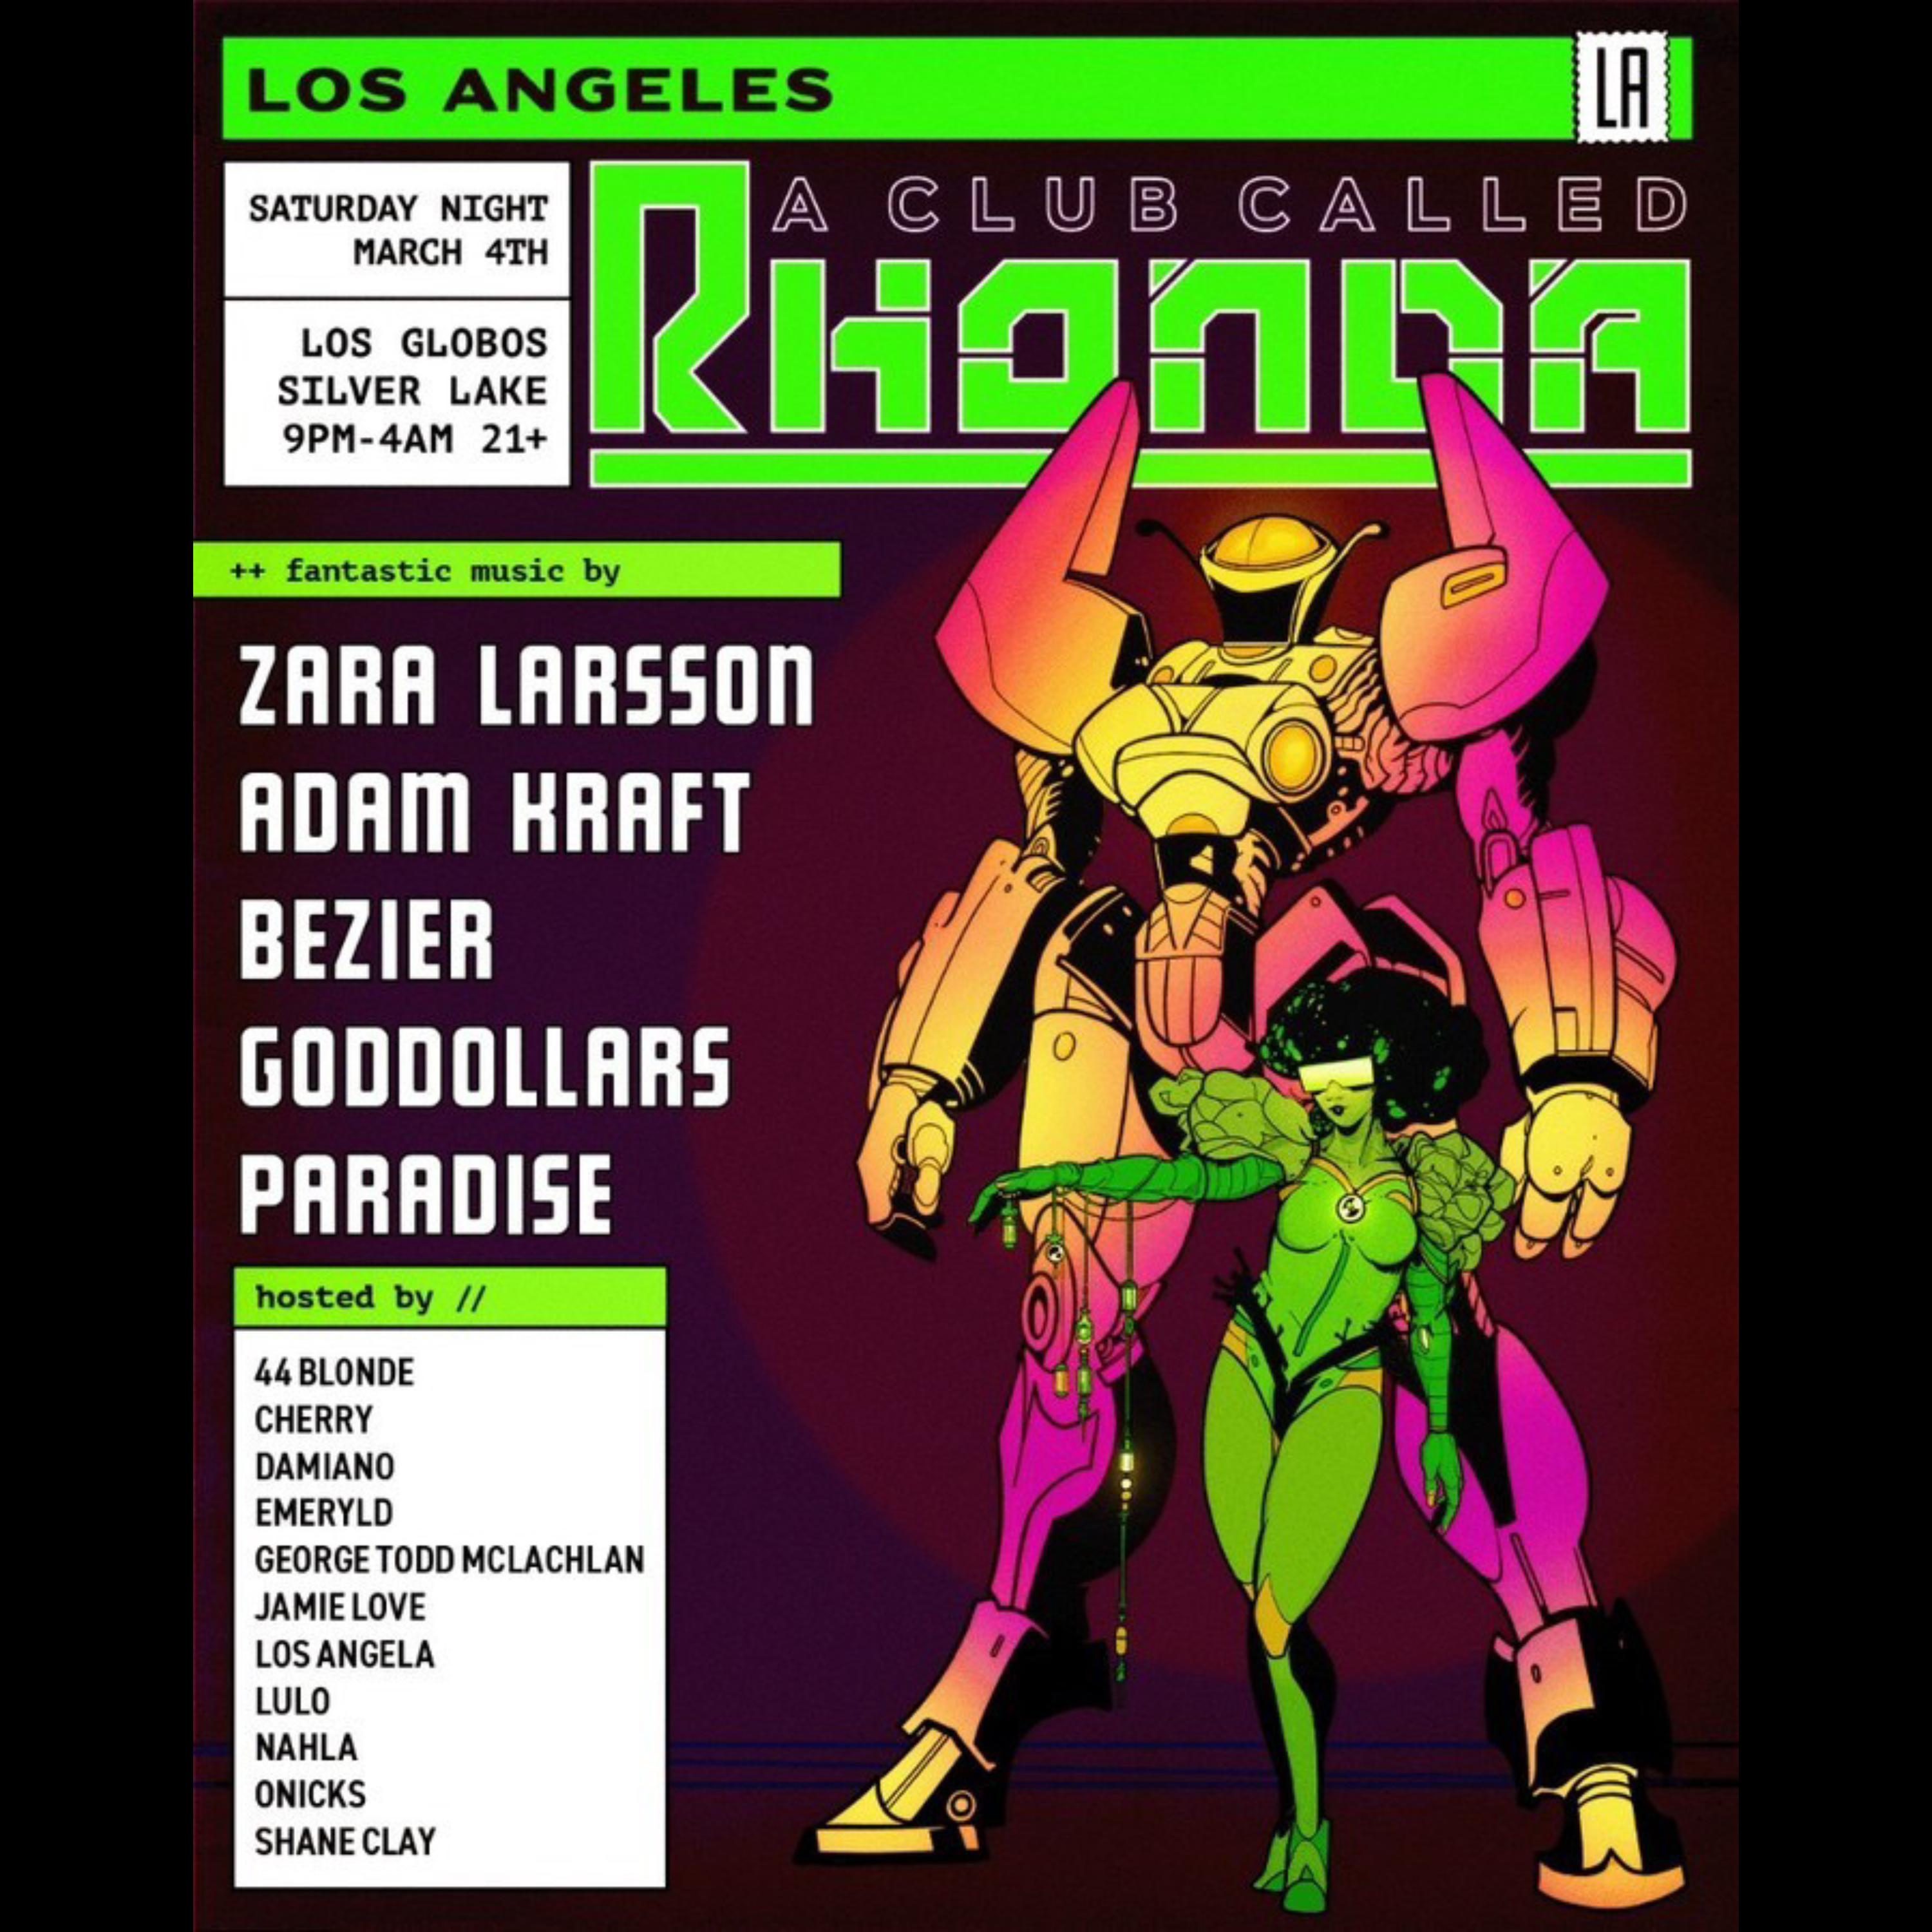 Flyer for A Club Called Rhonda in Los Angeles with Zara Larsson and Bézier March 4th 2023